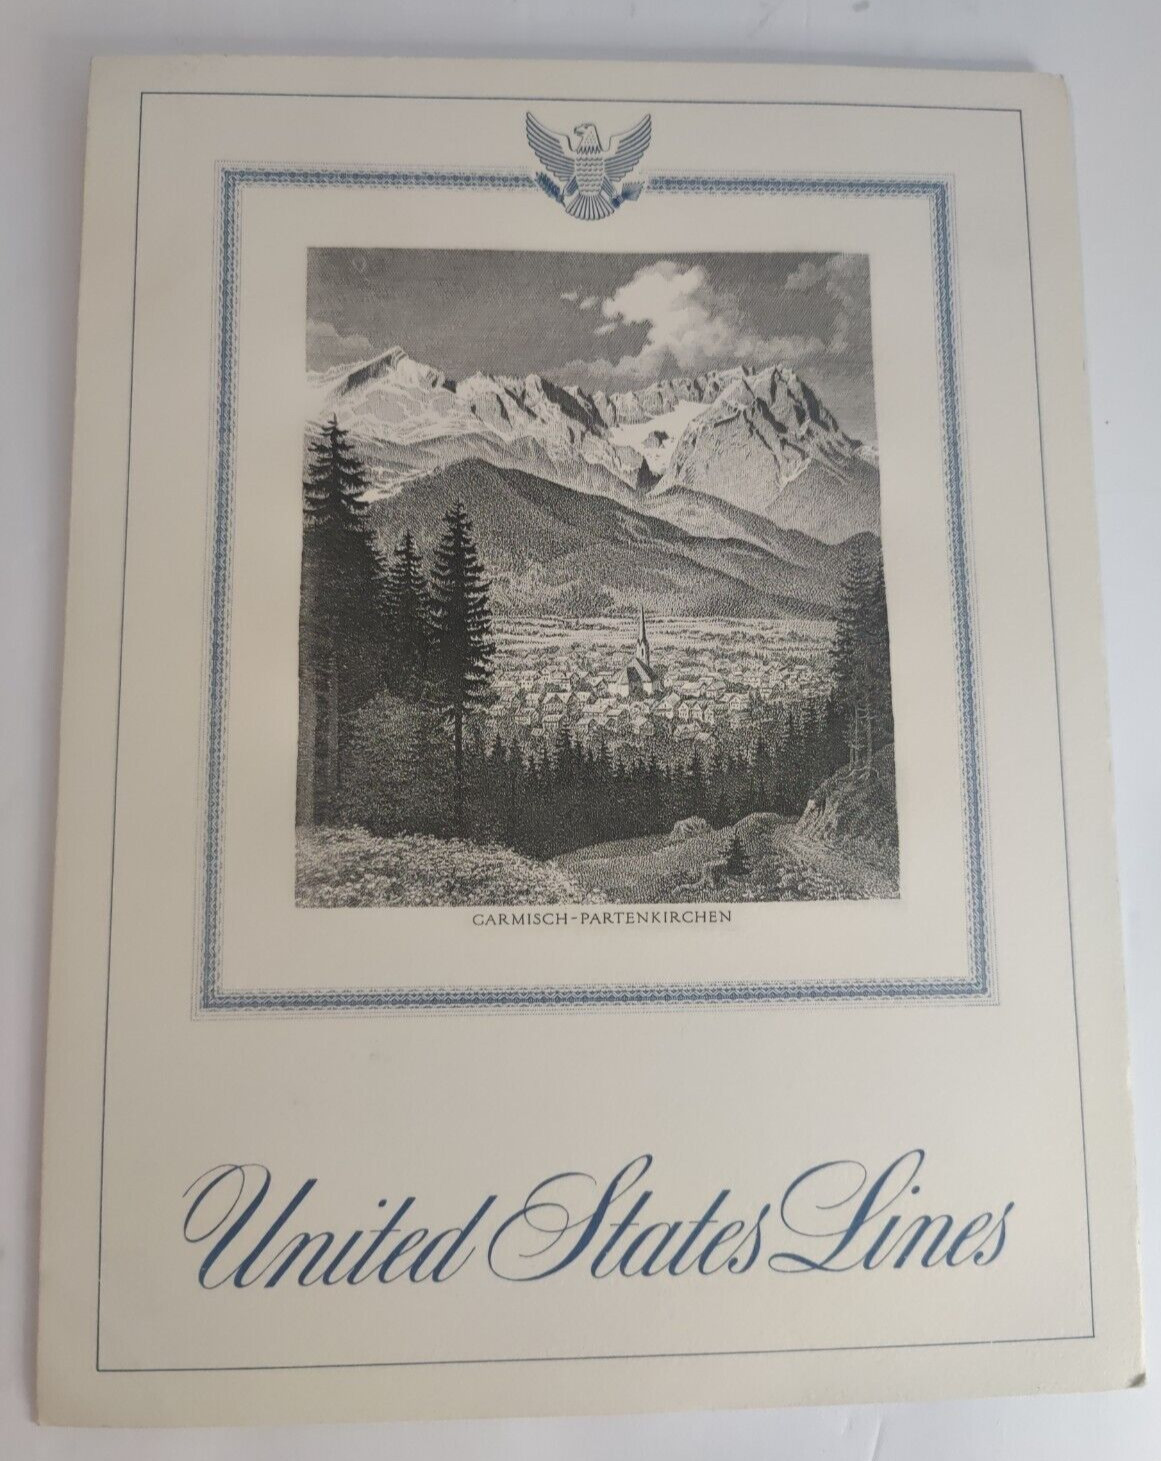 March 23, 1964 United States Line Ss America Passenger Ship Luncheon Menu